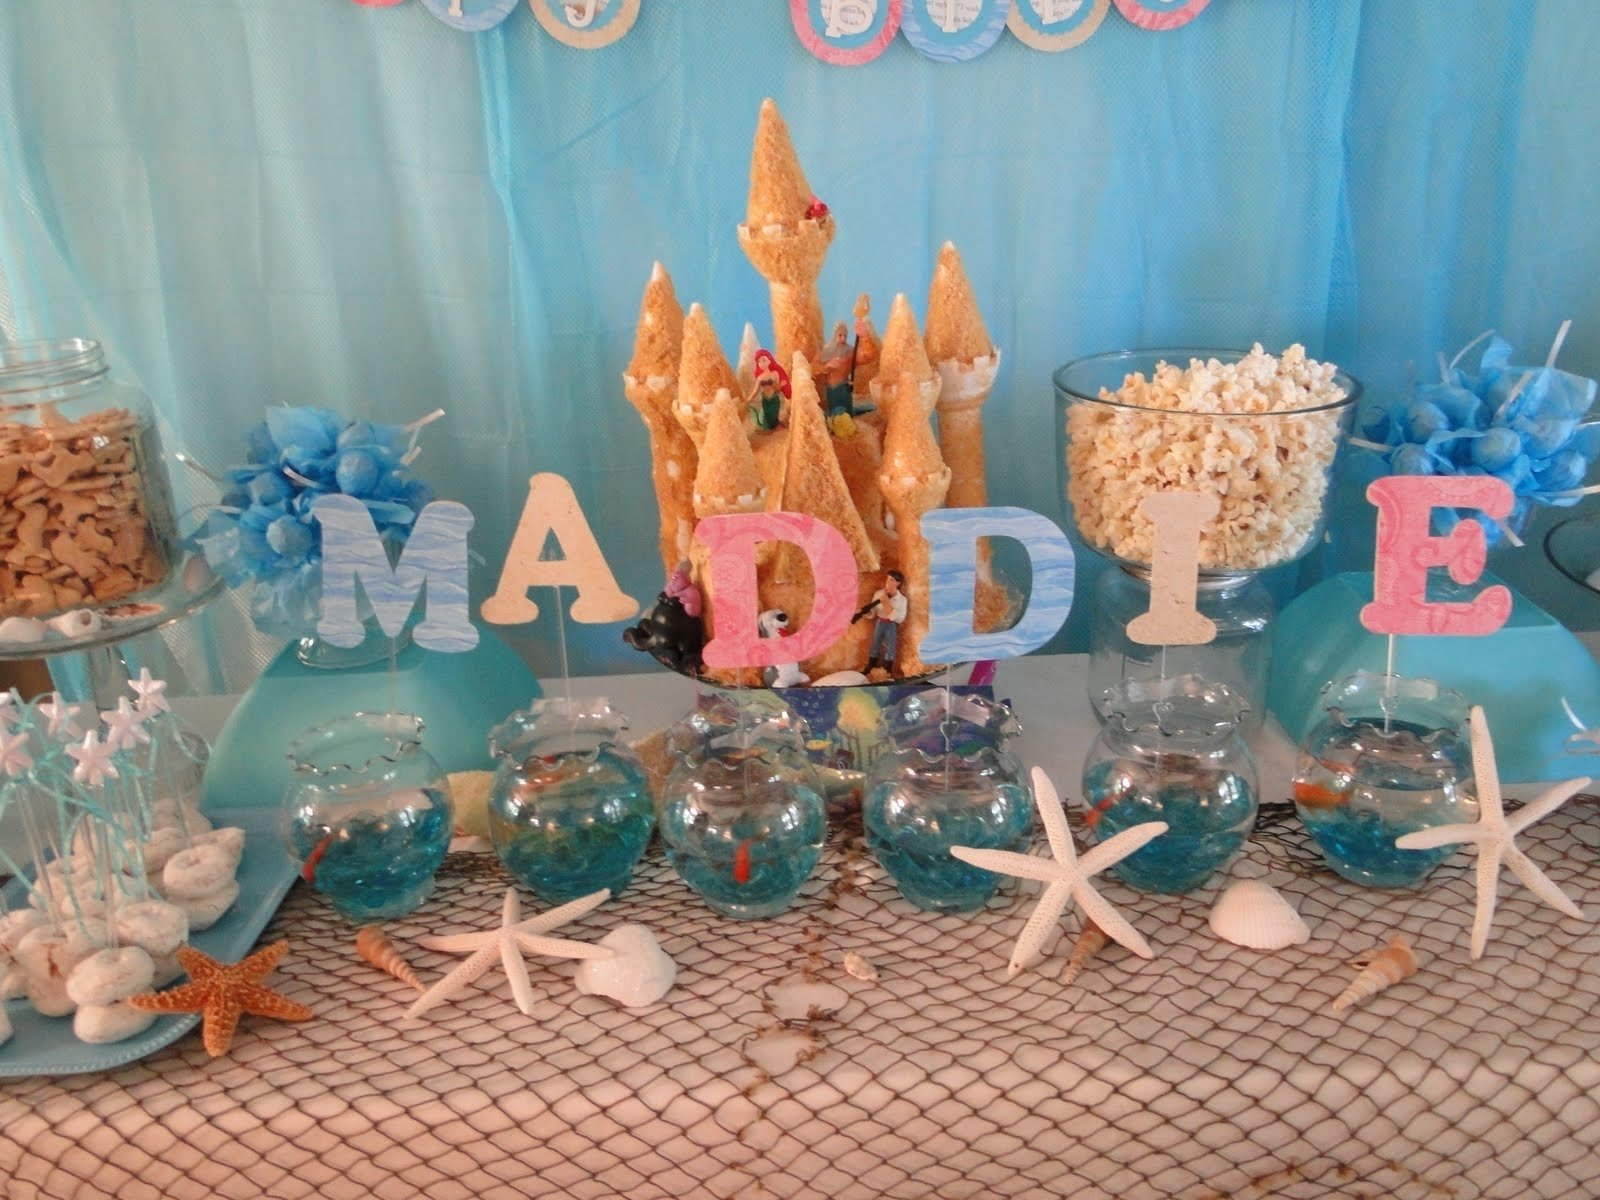 10 Most Recommended The Little Mermaid Party Ideas karas party ideas little mermaid under the sea birthday party 1 2023